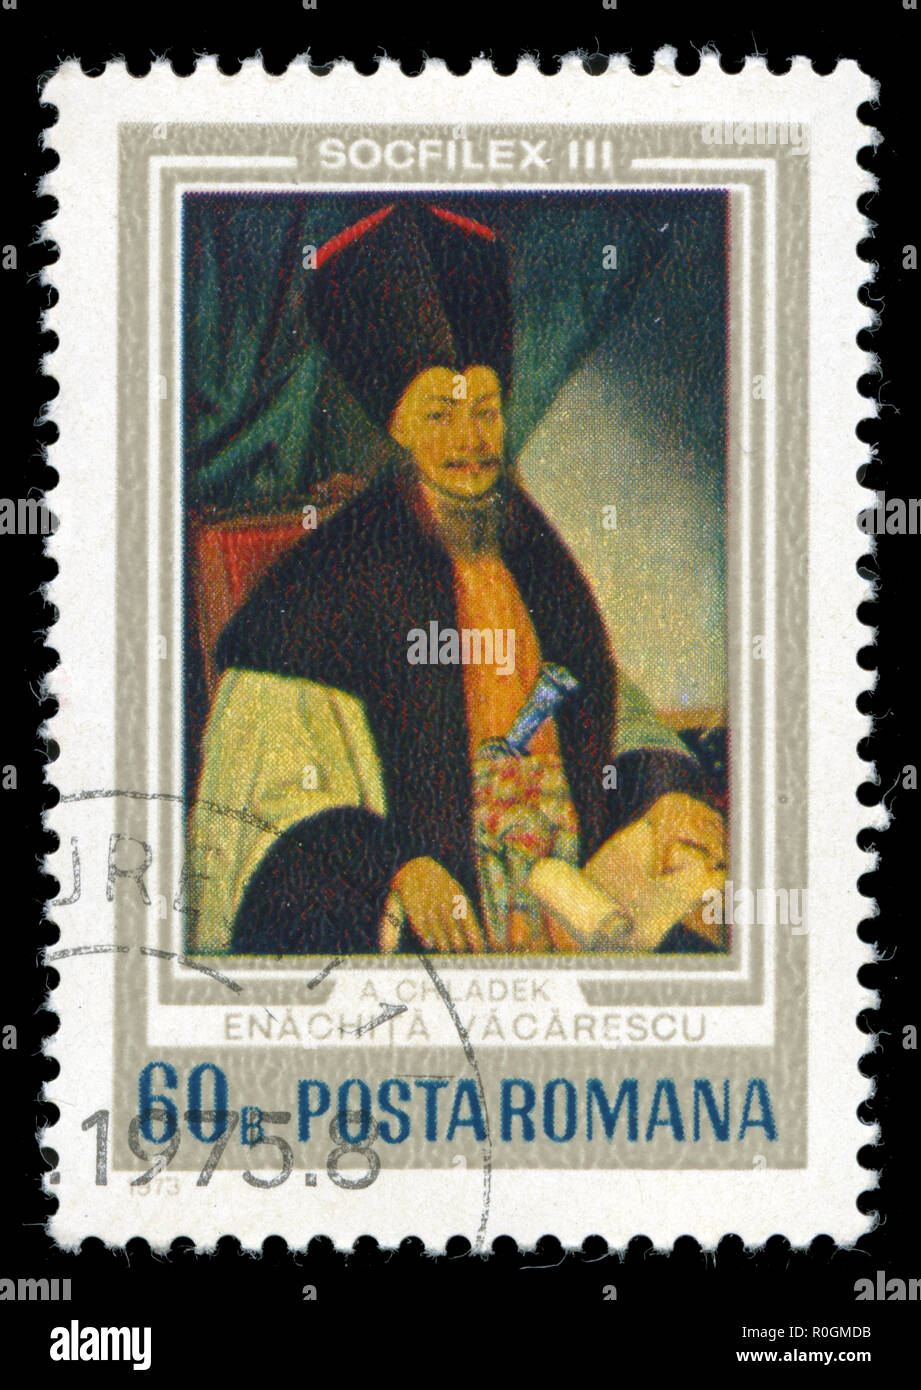 Postage stamp from Romania in the 'Socfilex III' Stamp Exhibition, Bucharest series issued in 1973 Stock Photo